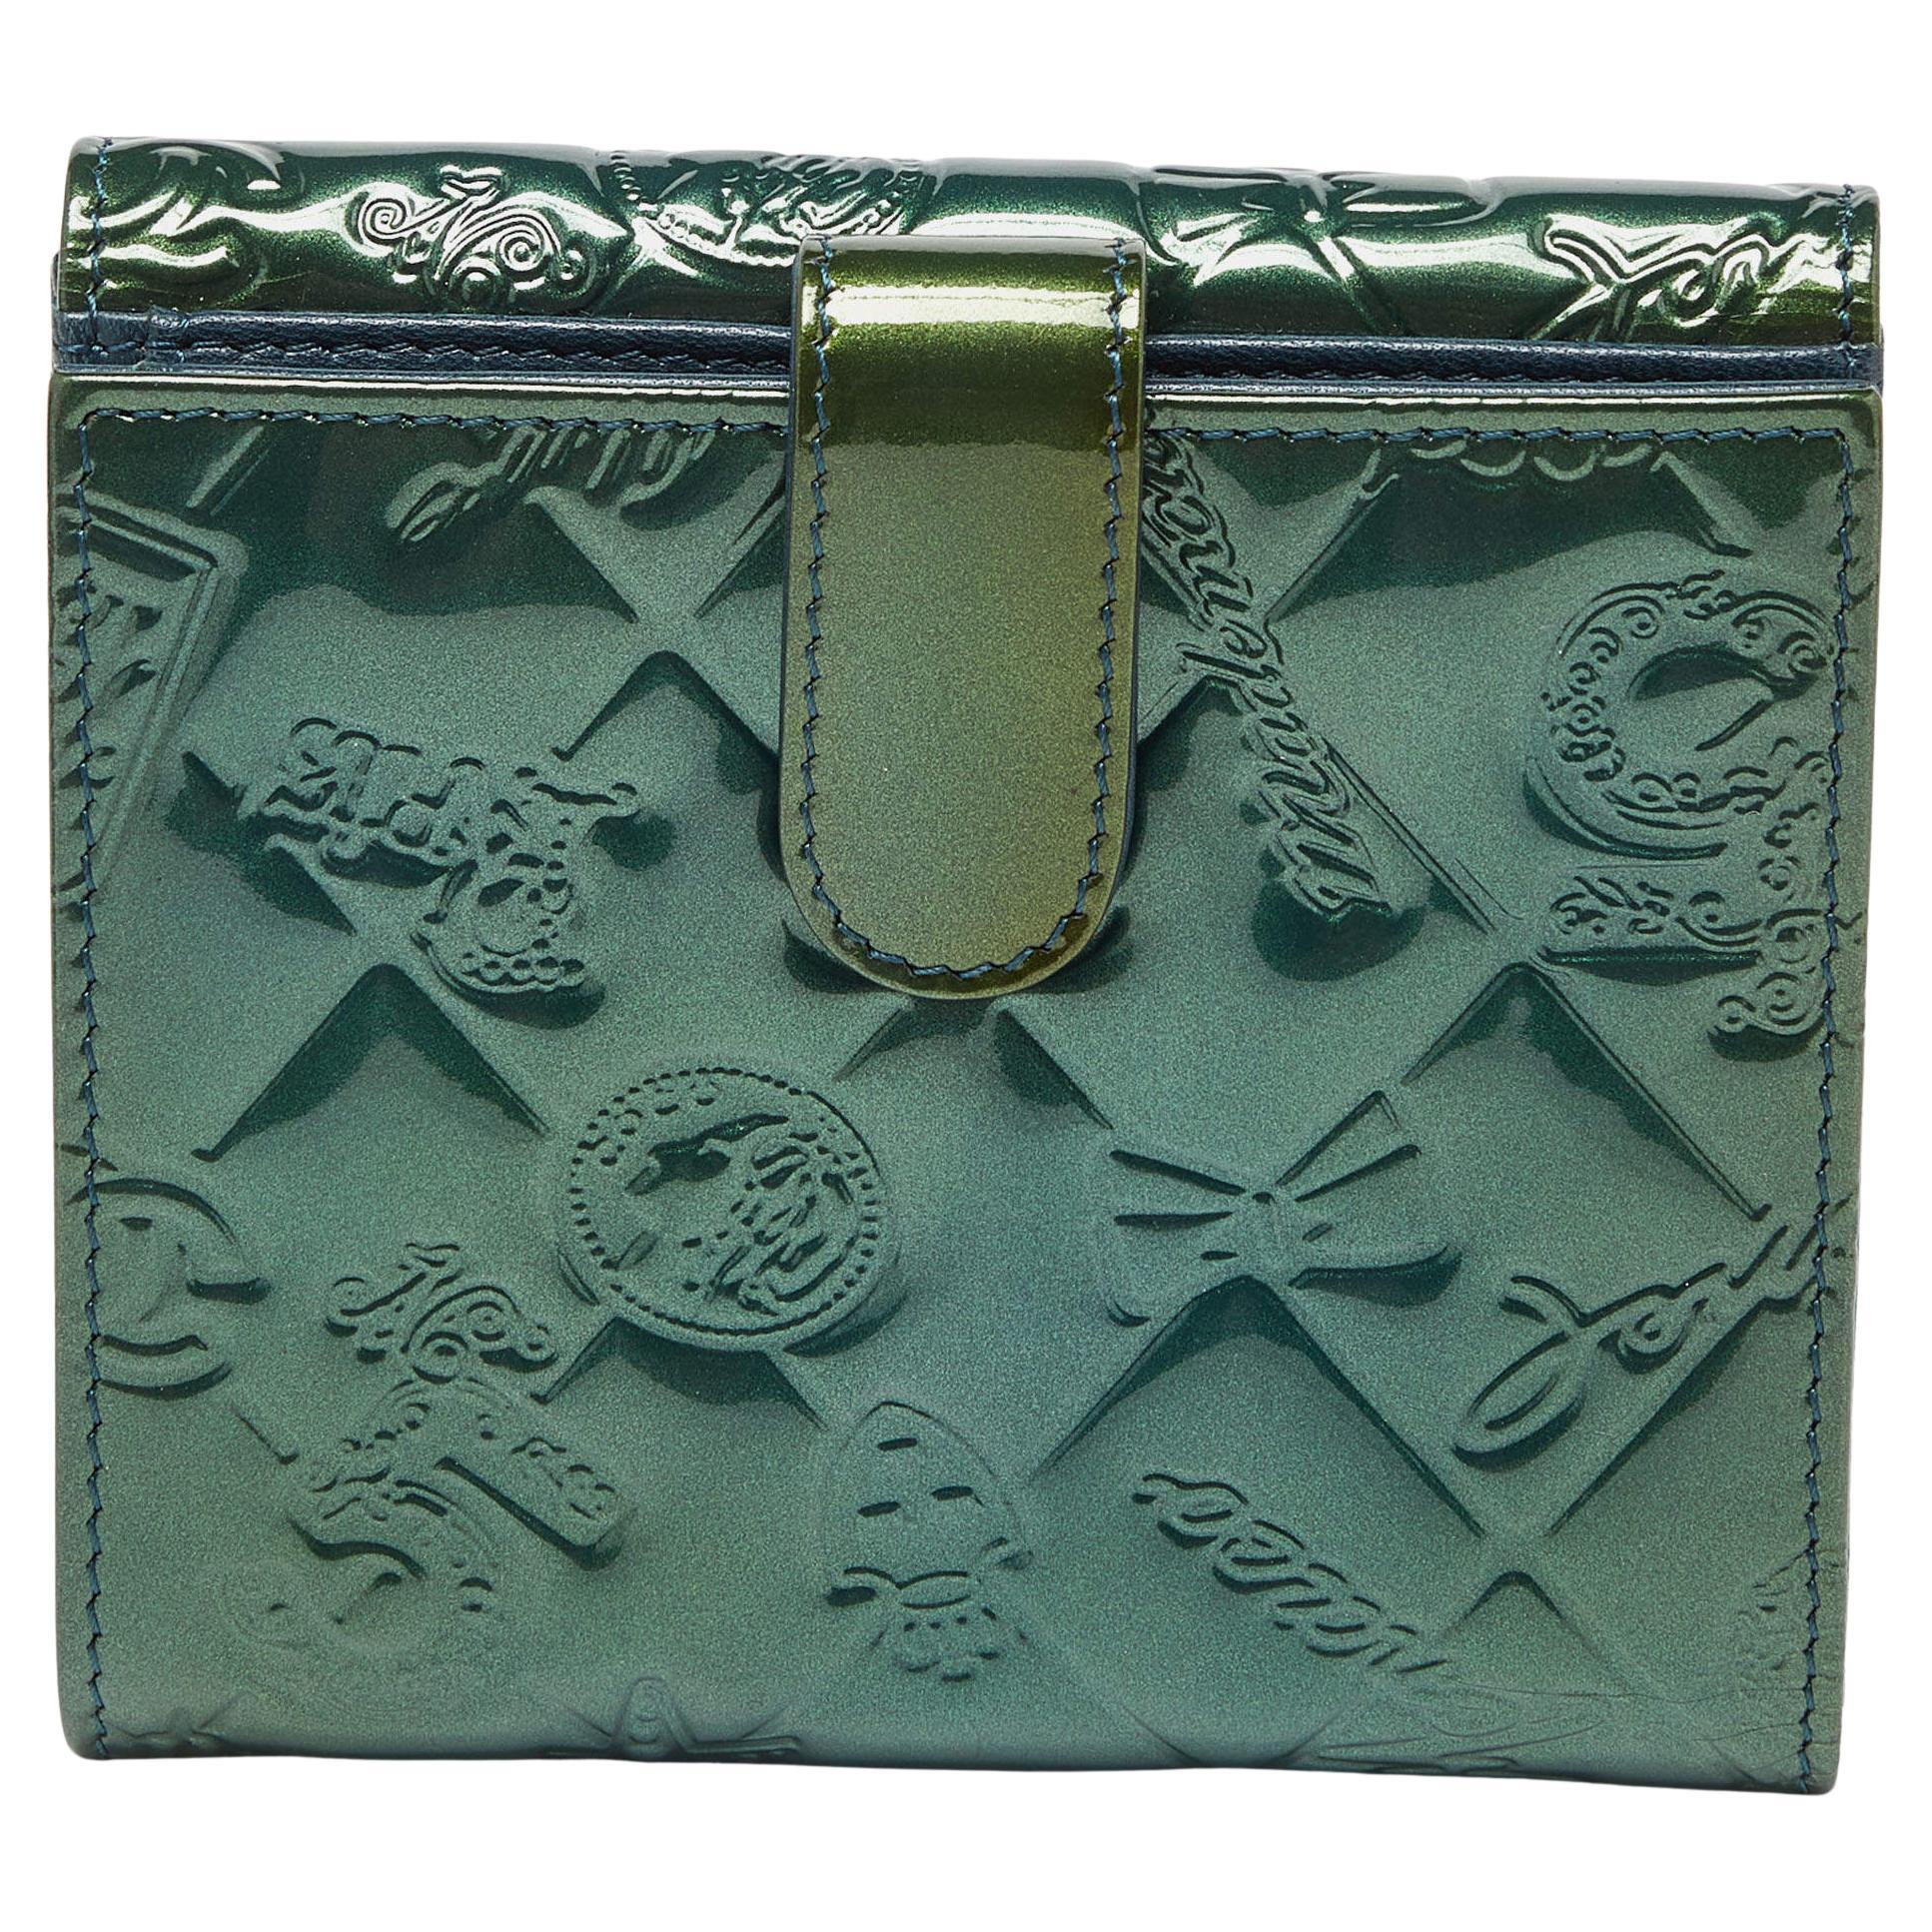 Chanel Green Patent Leather Symbols Lucky Charm Compact Wallet